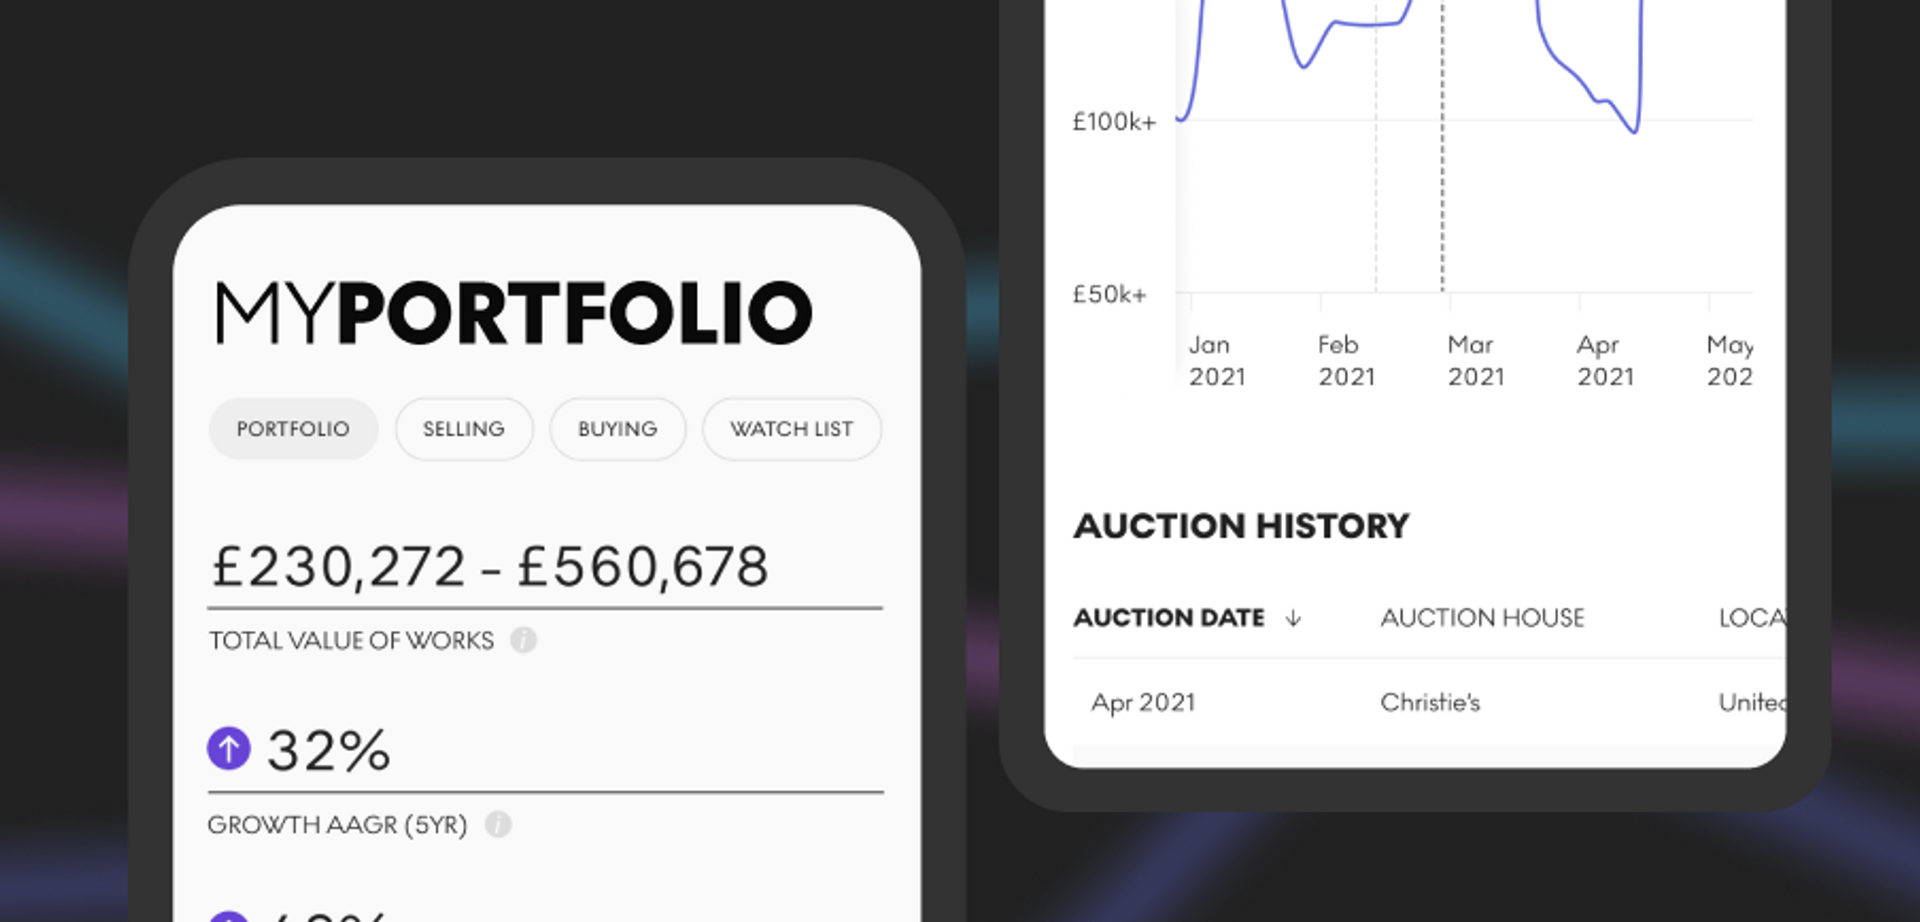 A graphic of two phone screens. The first phone screen shows the dashboard for MyPortfolio, with an exemplar portfolio. The screen shows the total value of artworks in the portfolio: £230,272-£560,678 and the Growth AAGR: 32%. On the second phone screen, a graph shows the value growth of an artwork over a 5-year period, and the auction history of that artwork.